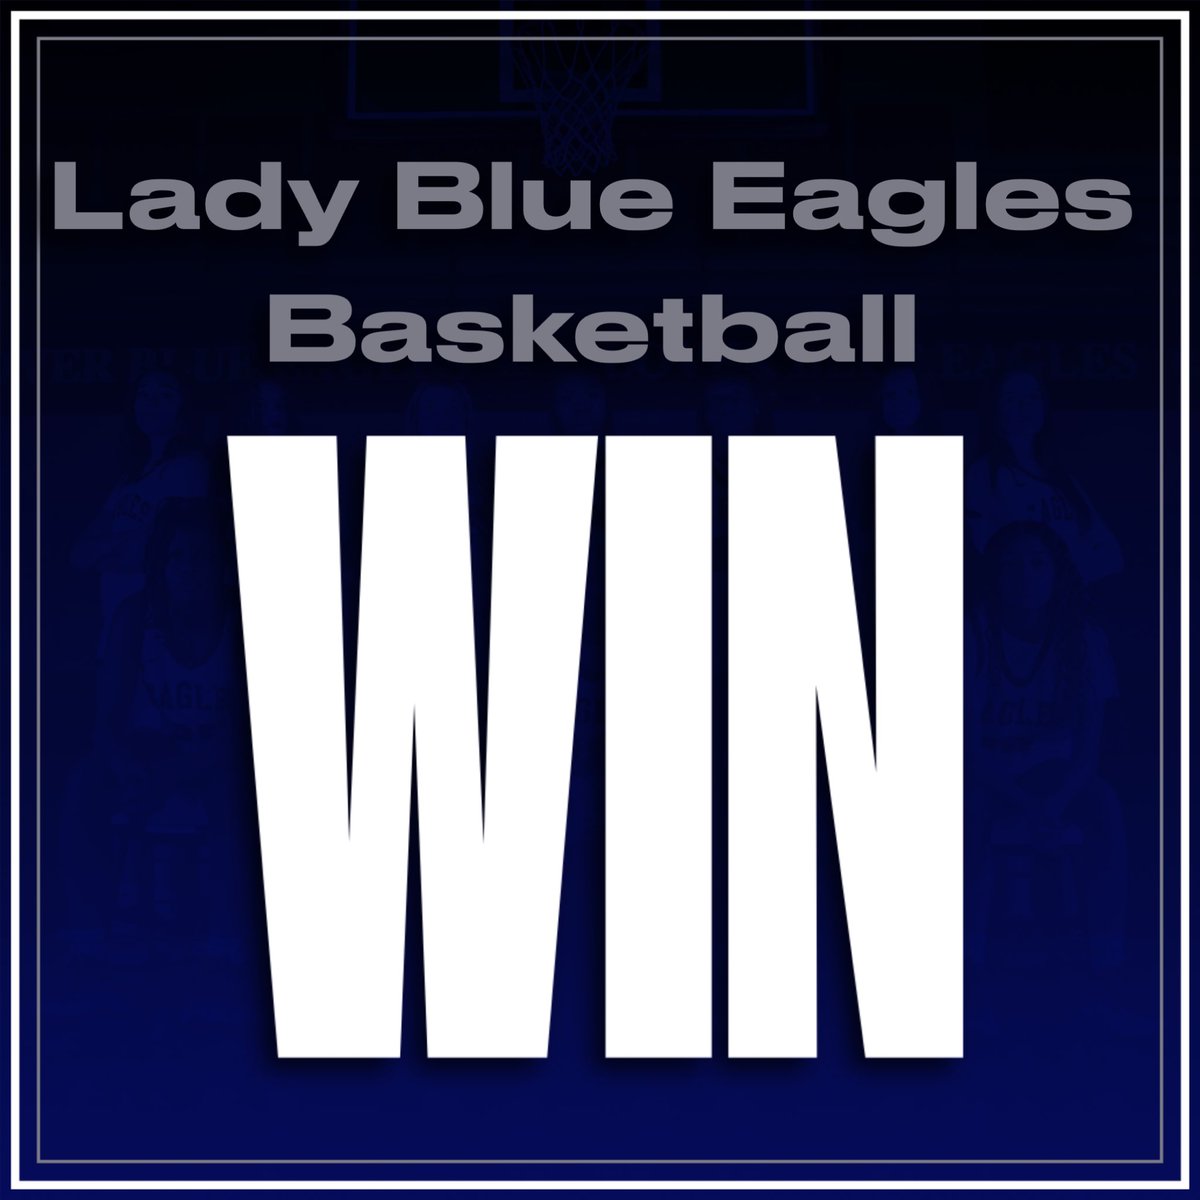 Picked up the win against Union County. Back in action at 7:30 tomorrow at Spartanburg High School. Come out and support your Lady Blue Eagles #selfless #sacrifice